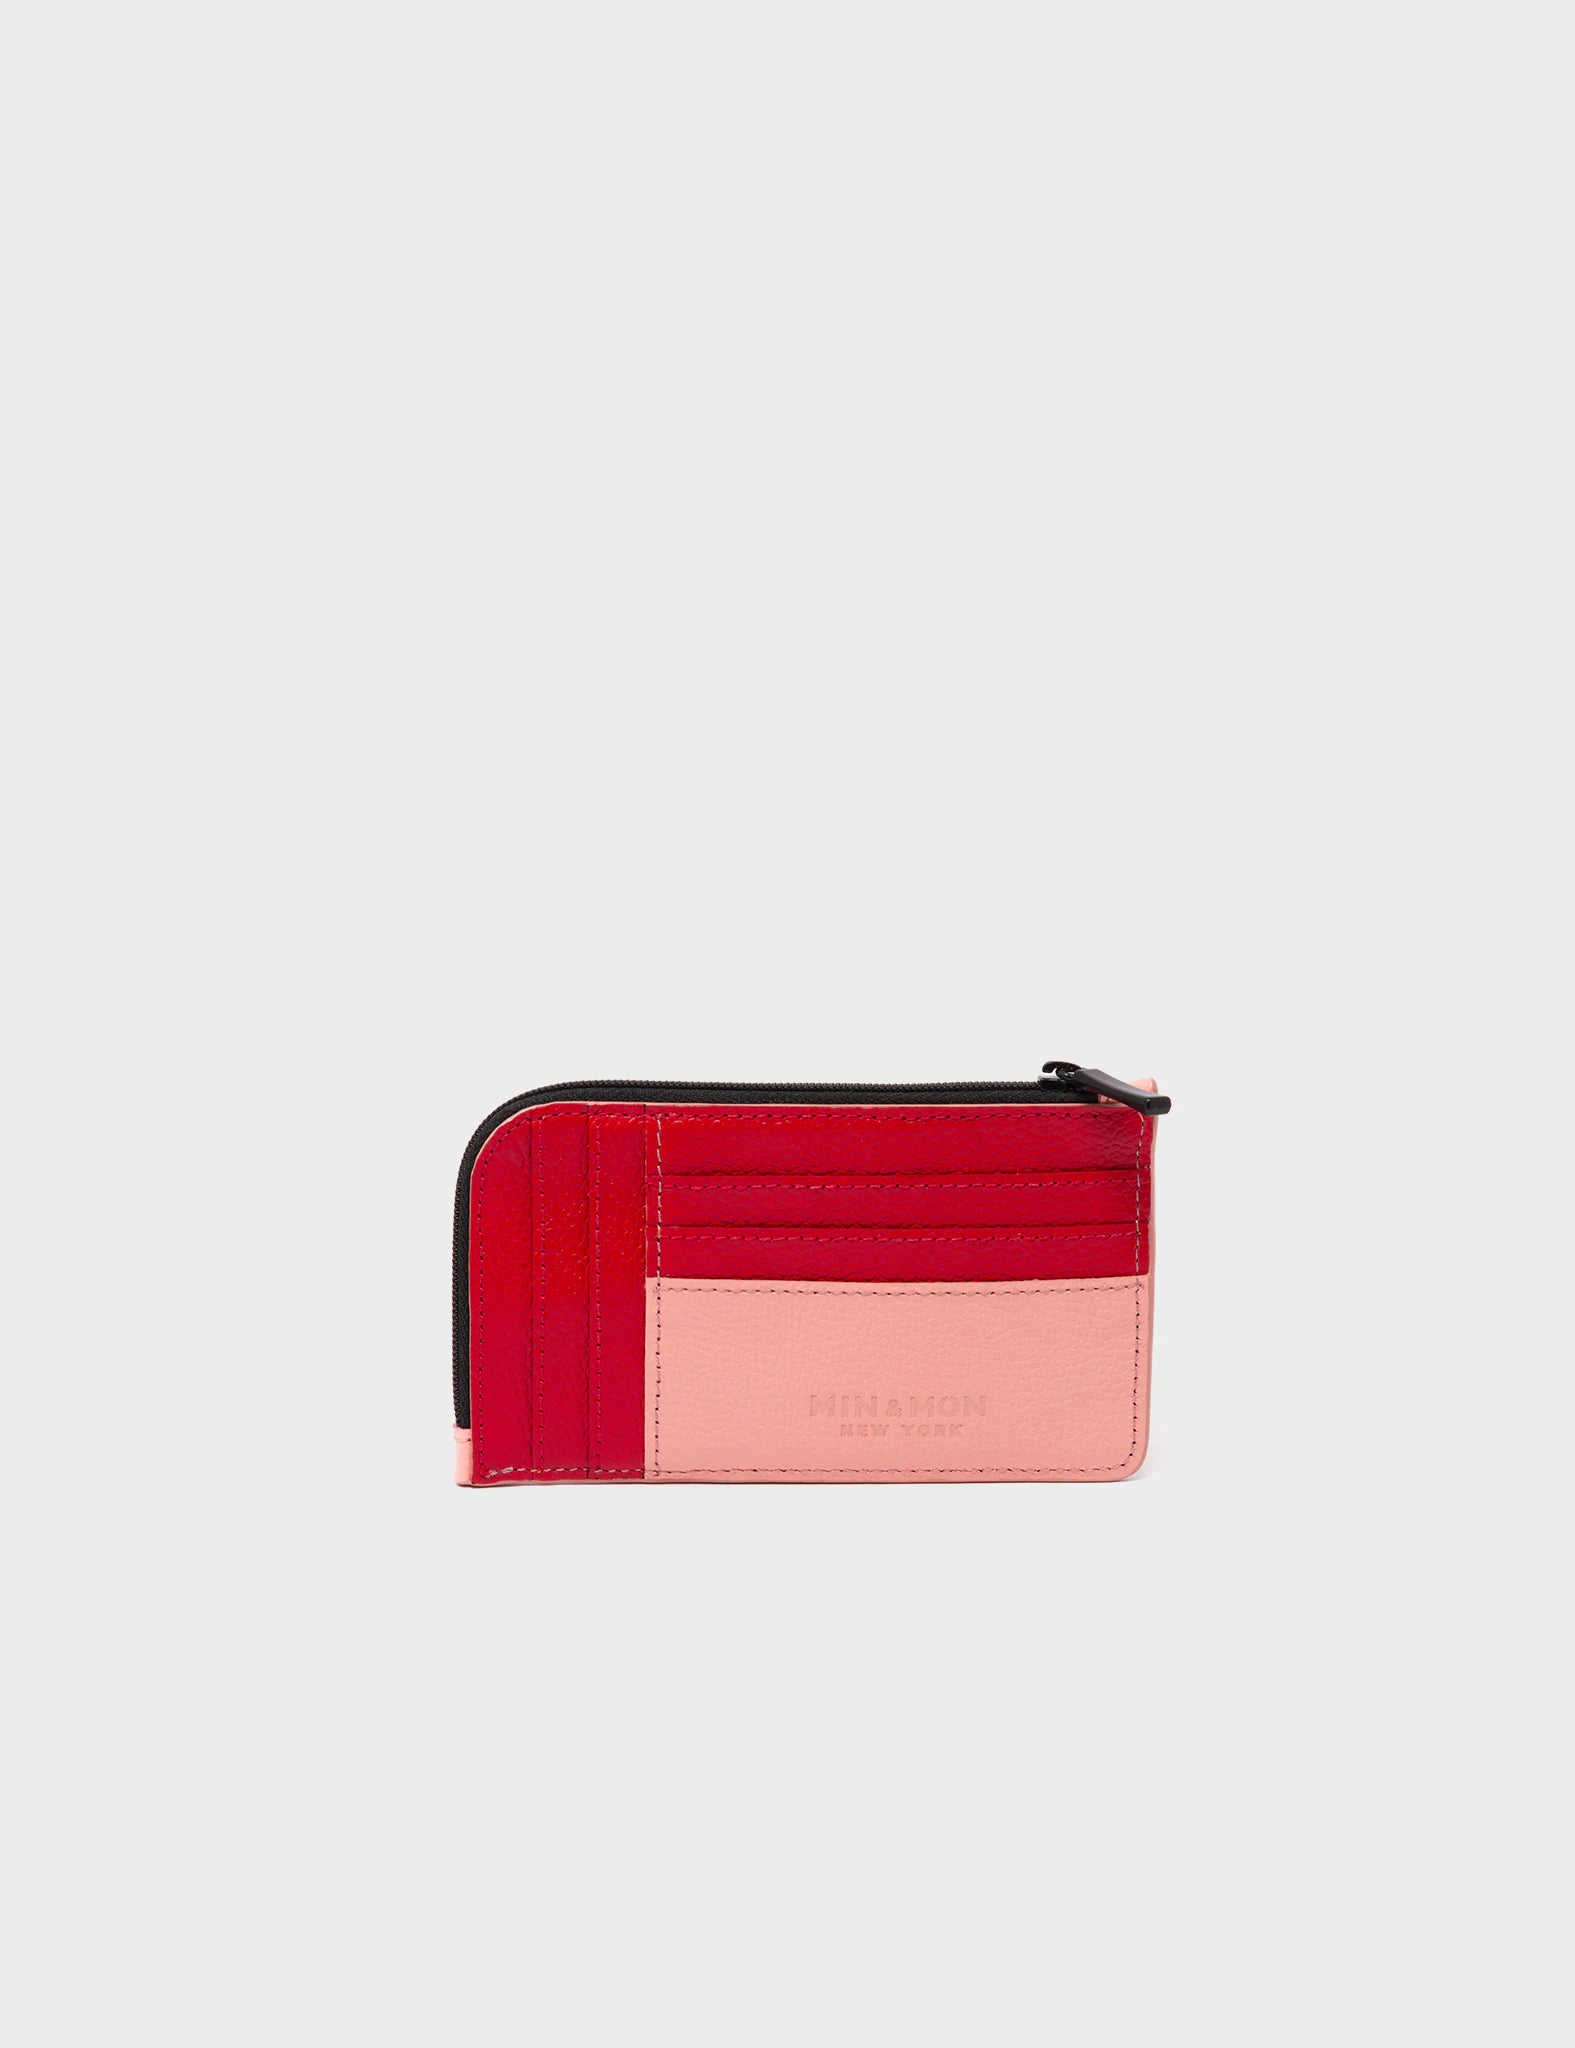 Fausto Rose Leather Zip-around Cardholder - Urban Doodles Print - Back View